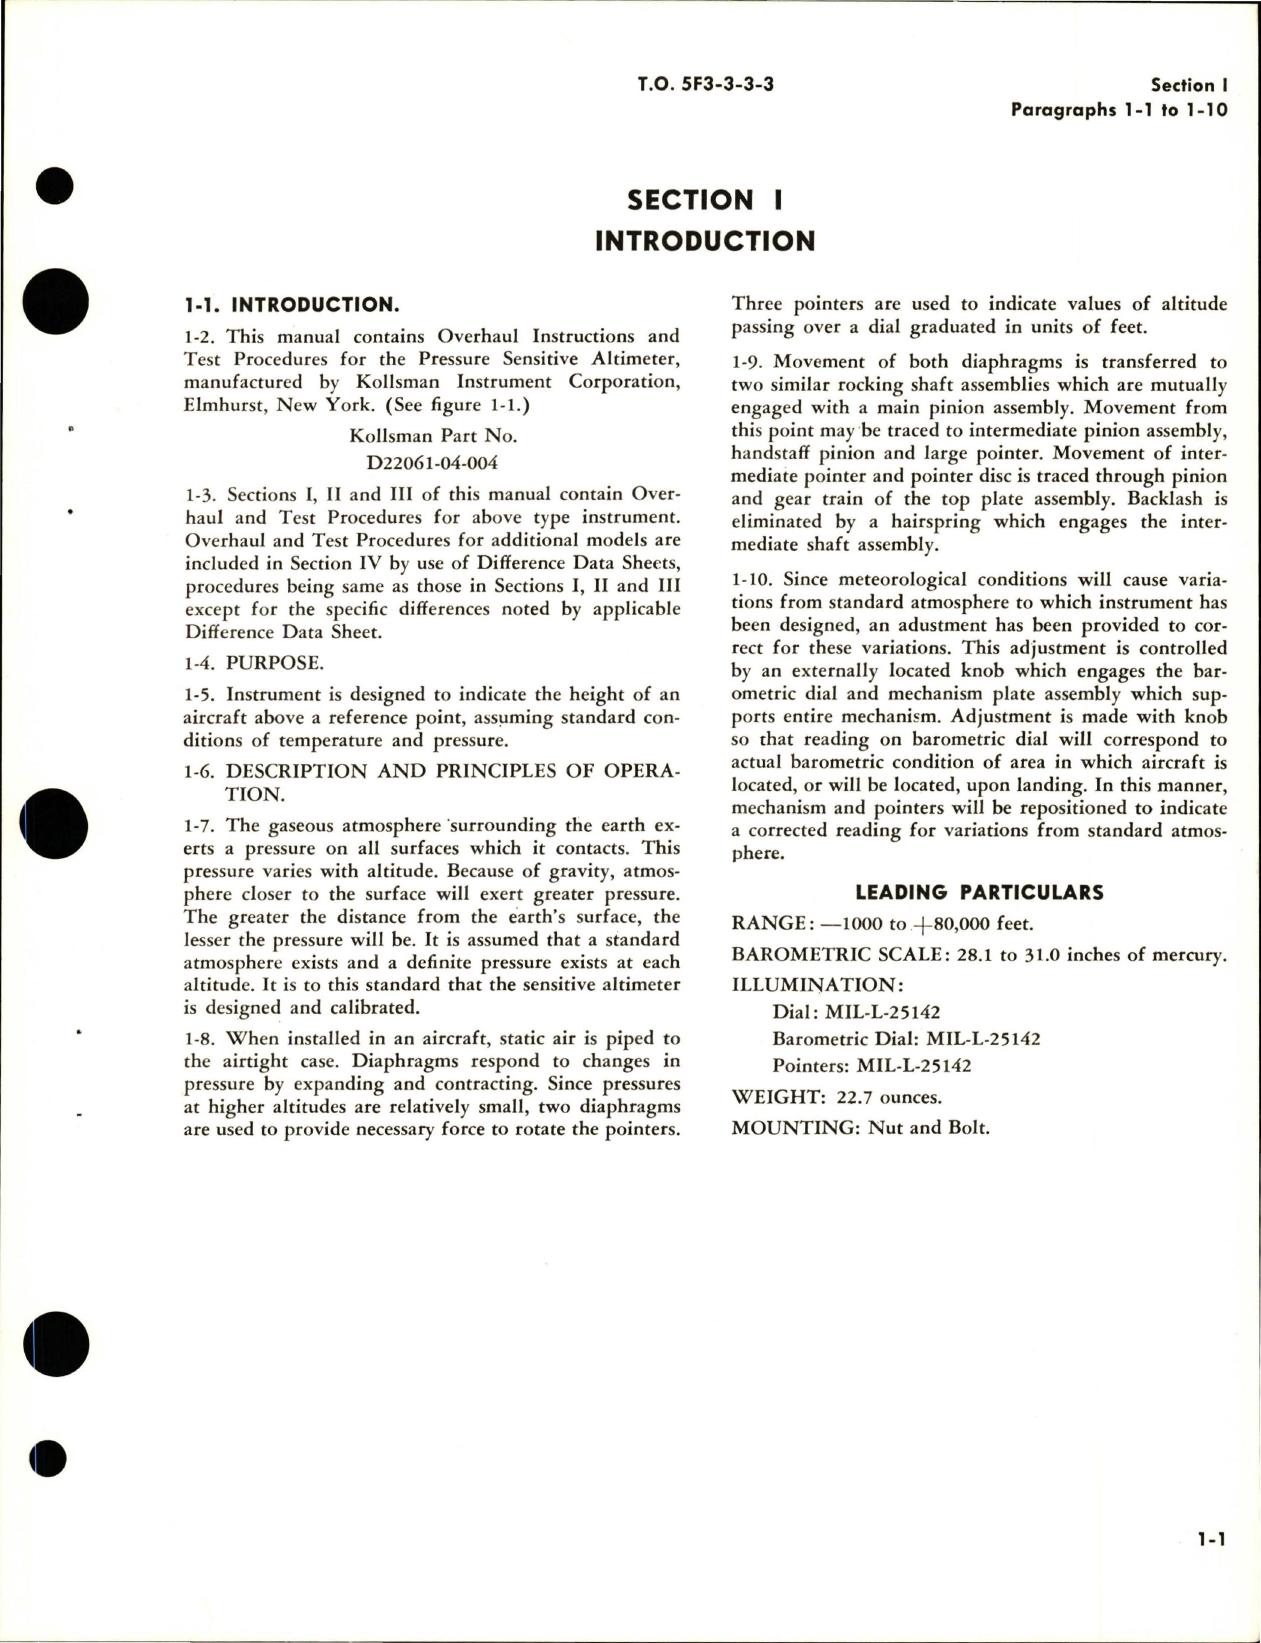 Sample page 5 from AirCorps Library document: Overhaul for Pressure Sensitive Altimeters - Parts D22061 04 004 and D22061 04 010